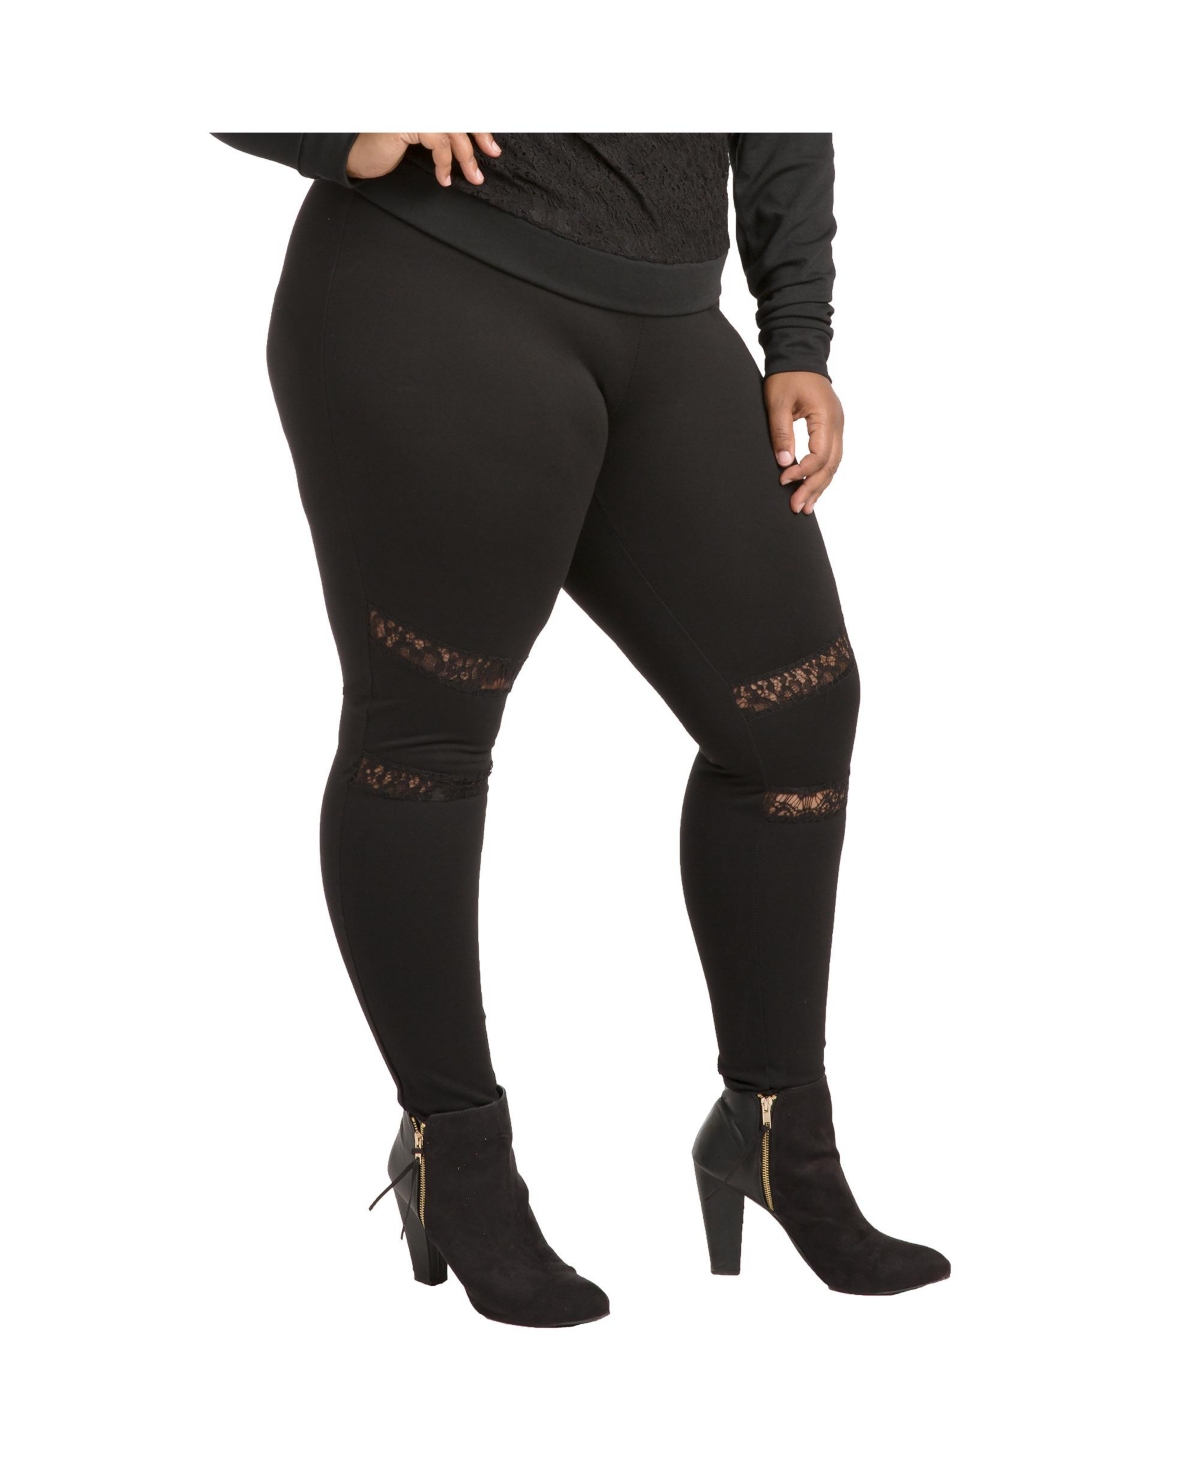 Women's Plus Size Curvy-Fit Lace Inset Pull-On Ponte Legging - Charcoal